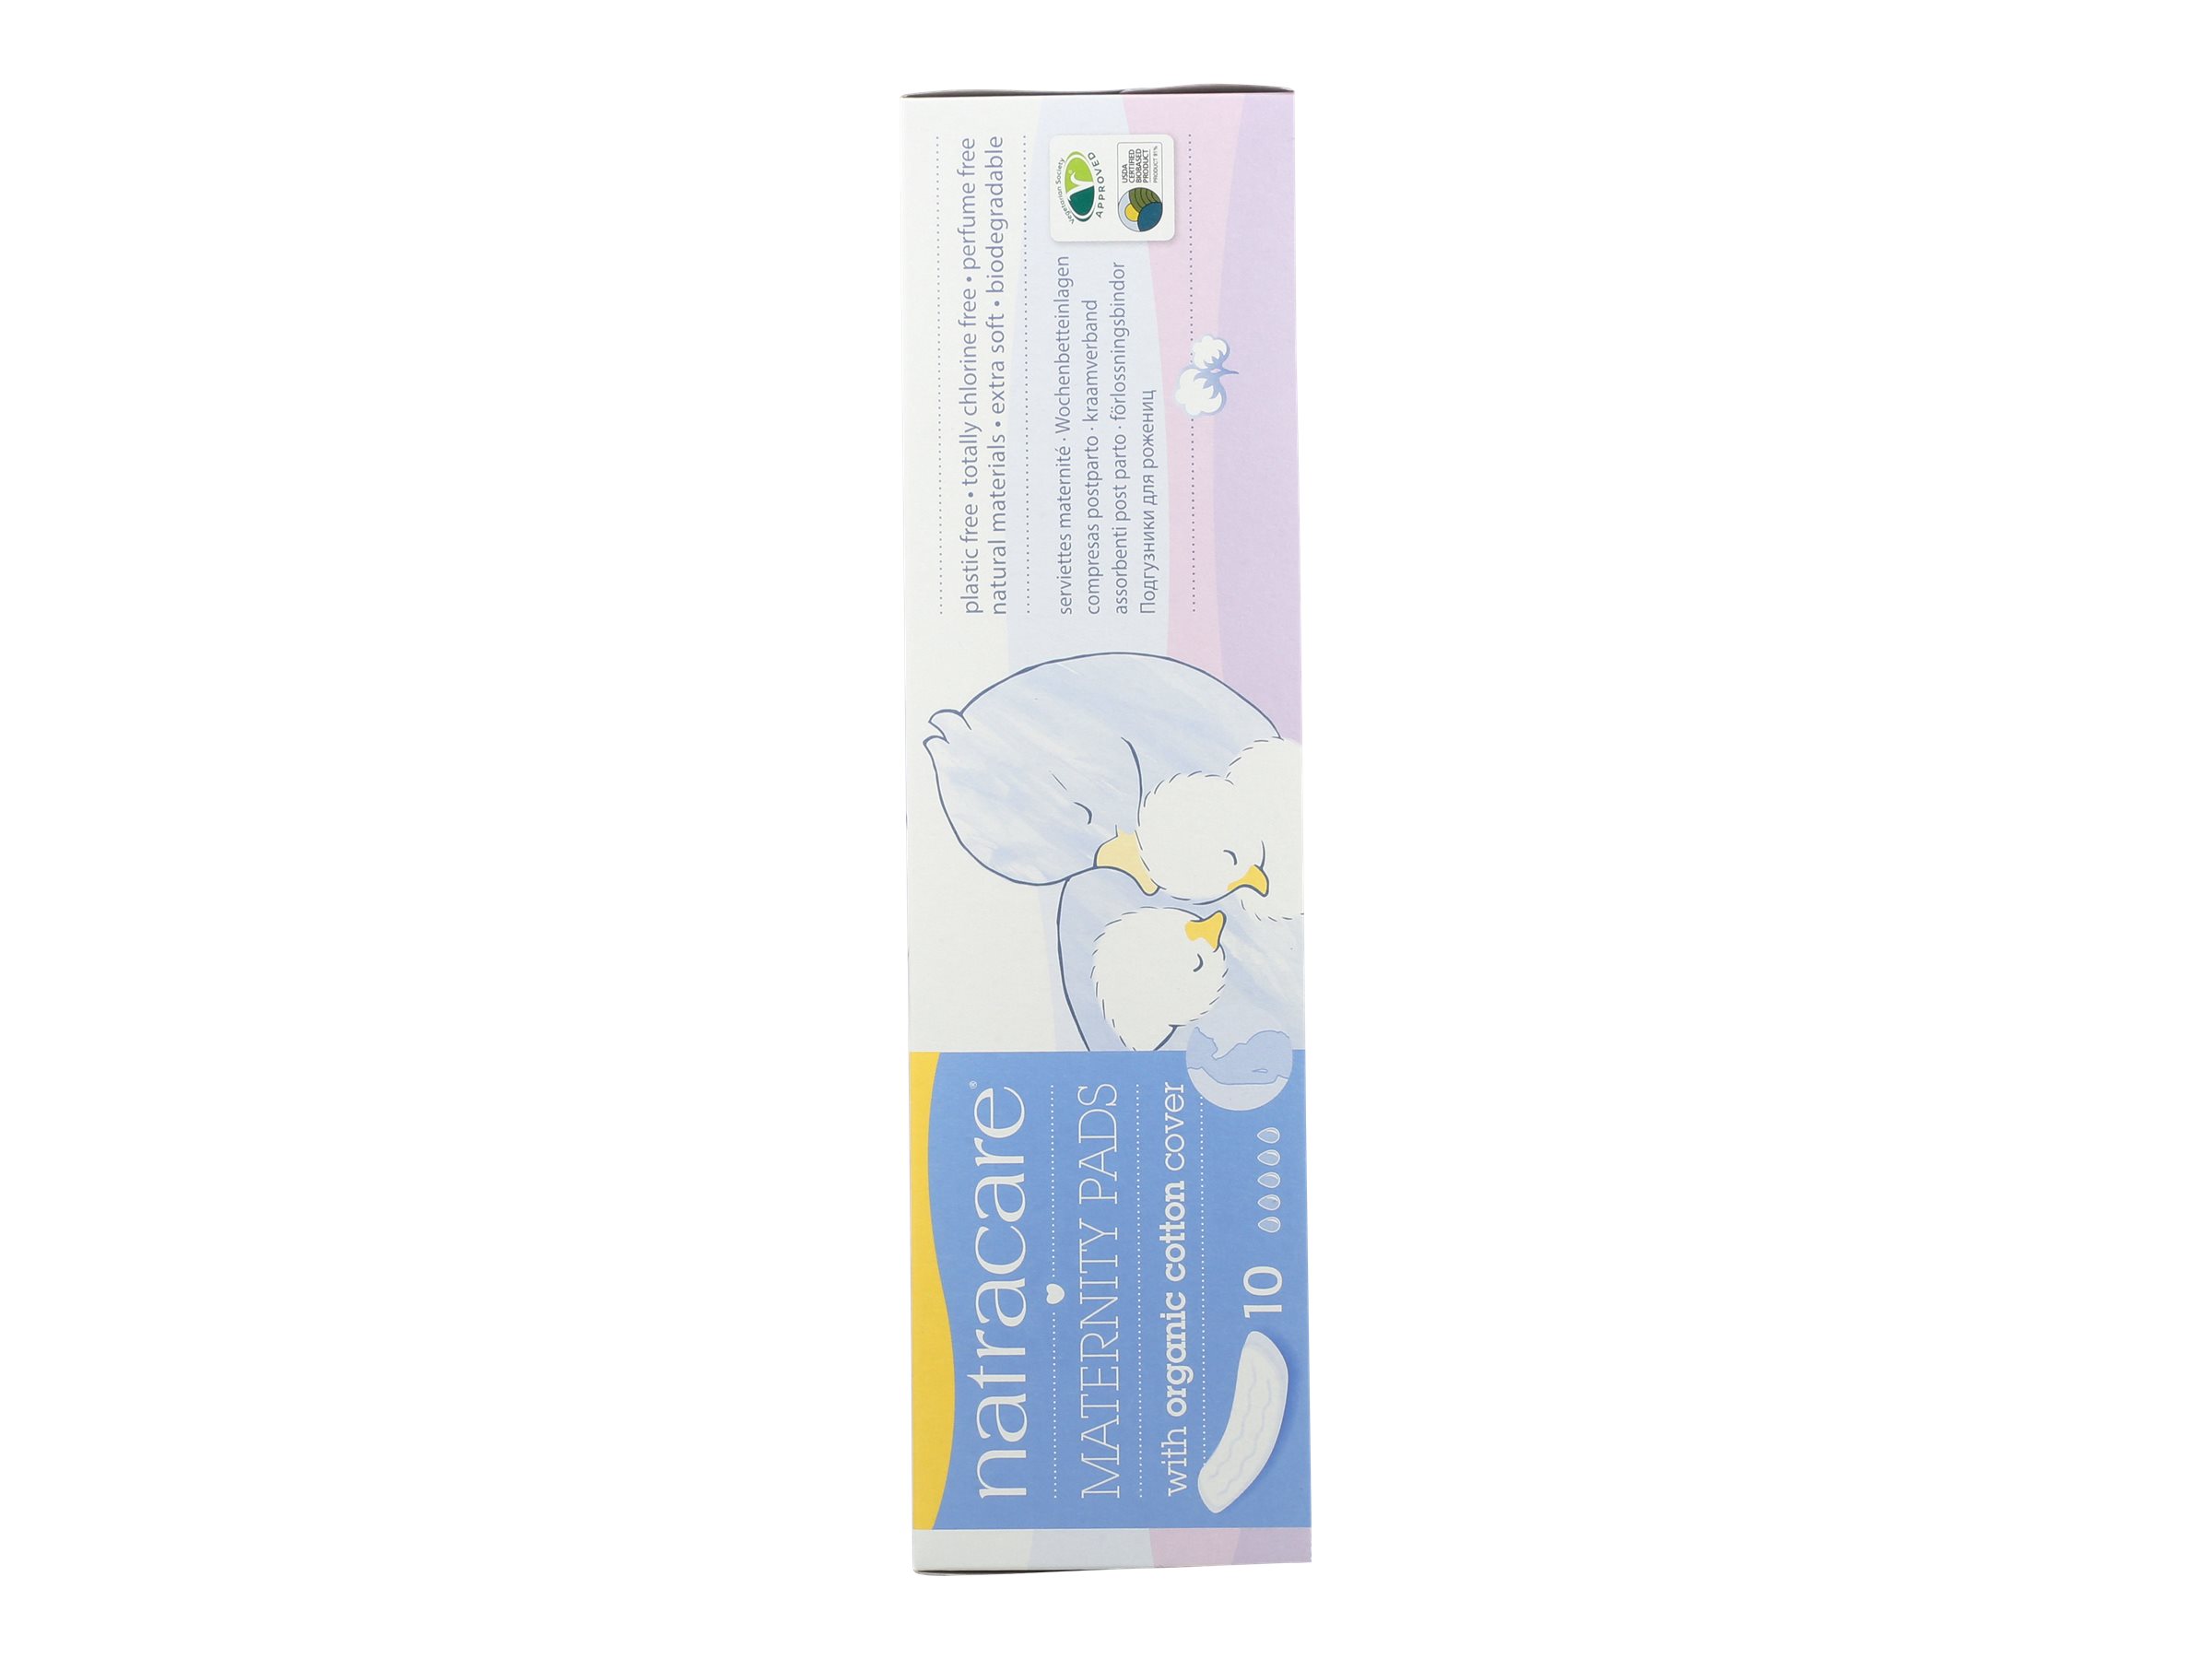 Natracare Natural Maternity Pads - 10's